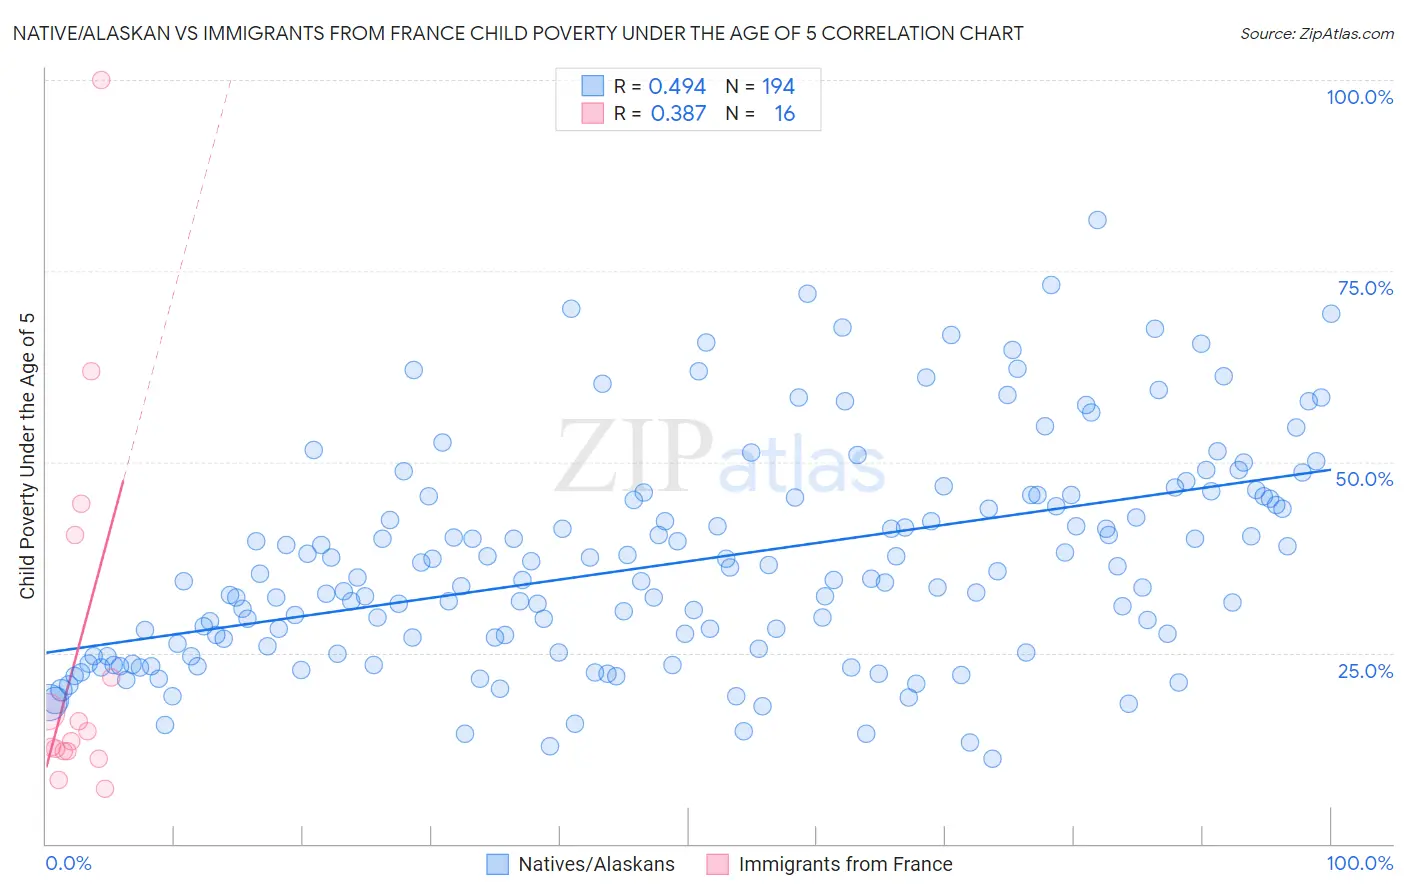 Native/Alaskan vs Immigrants from France Child Poverty Under the Age of 5